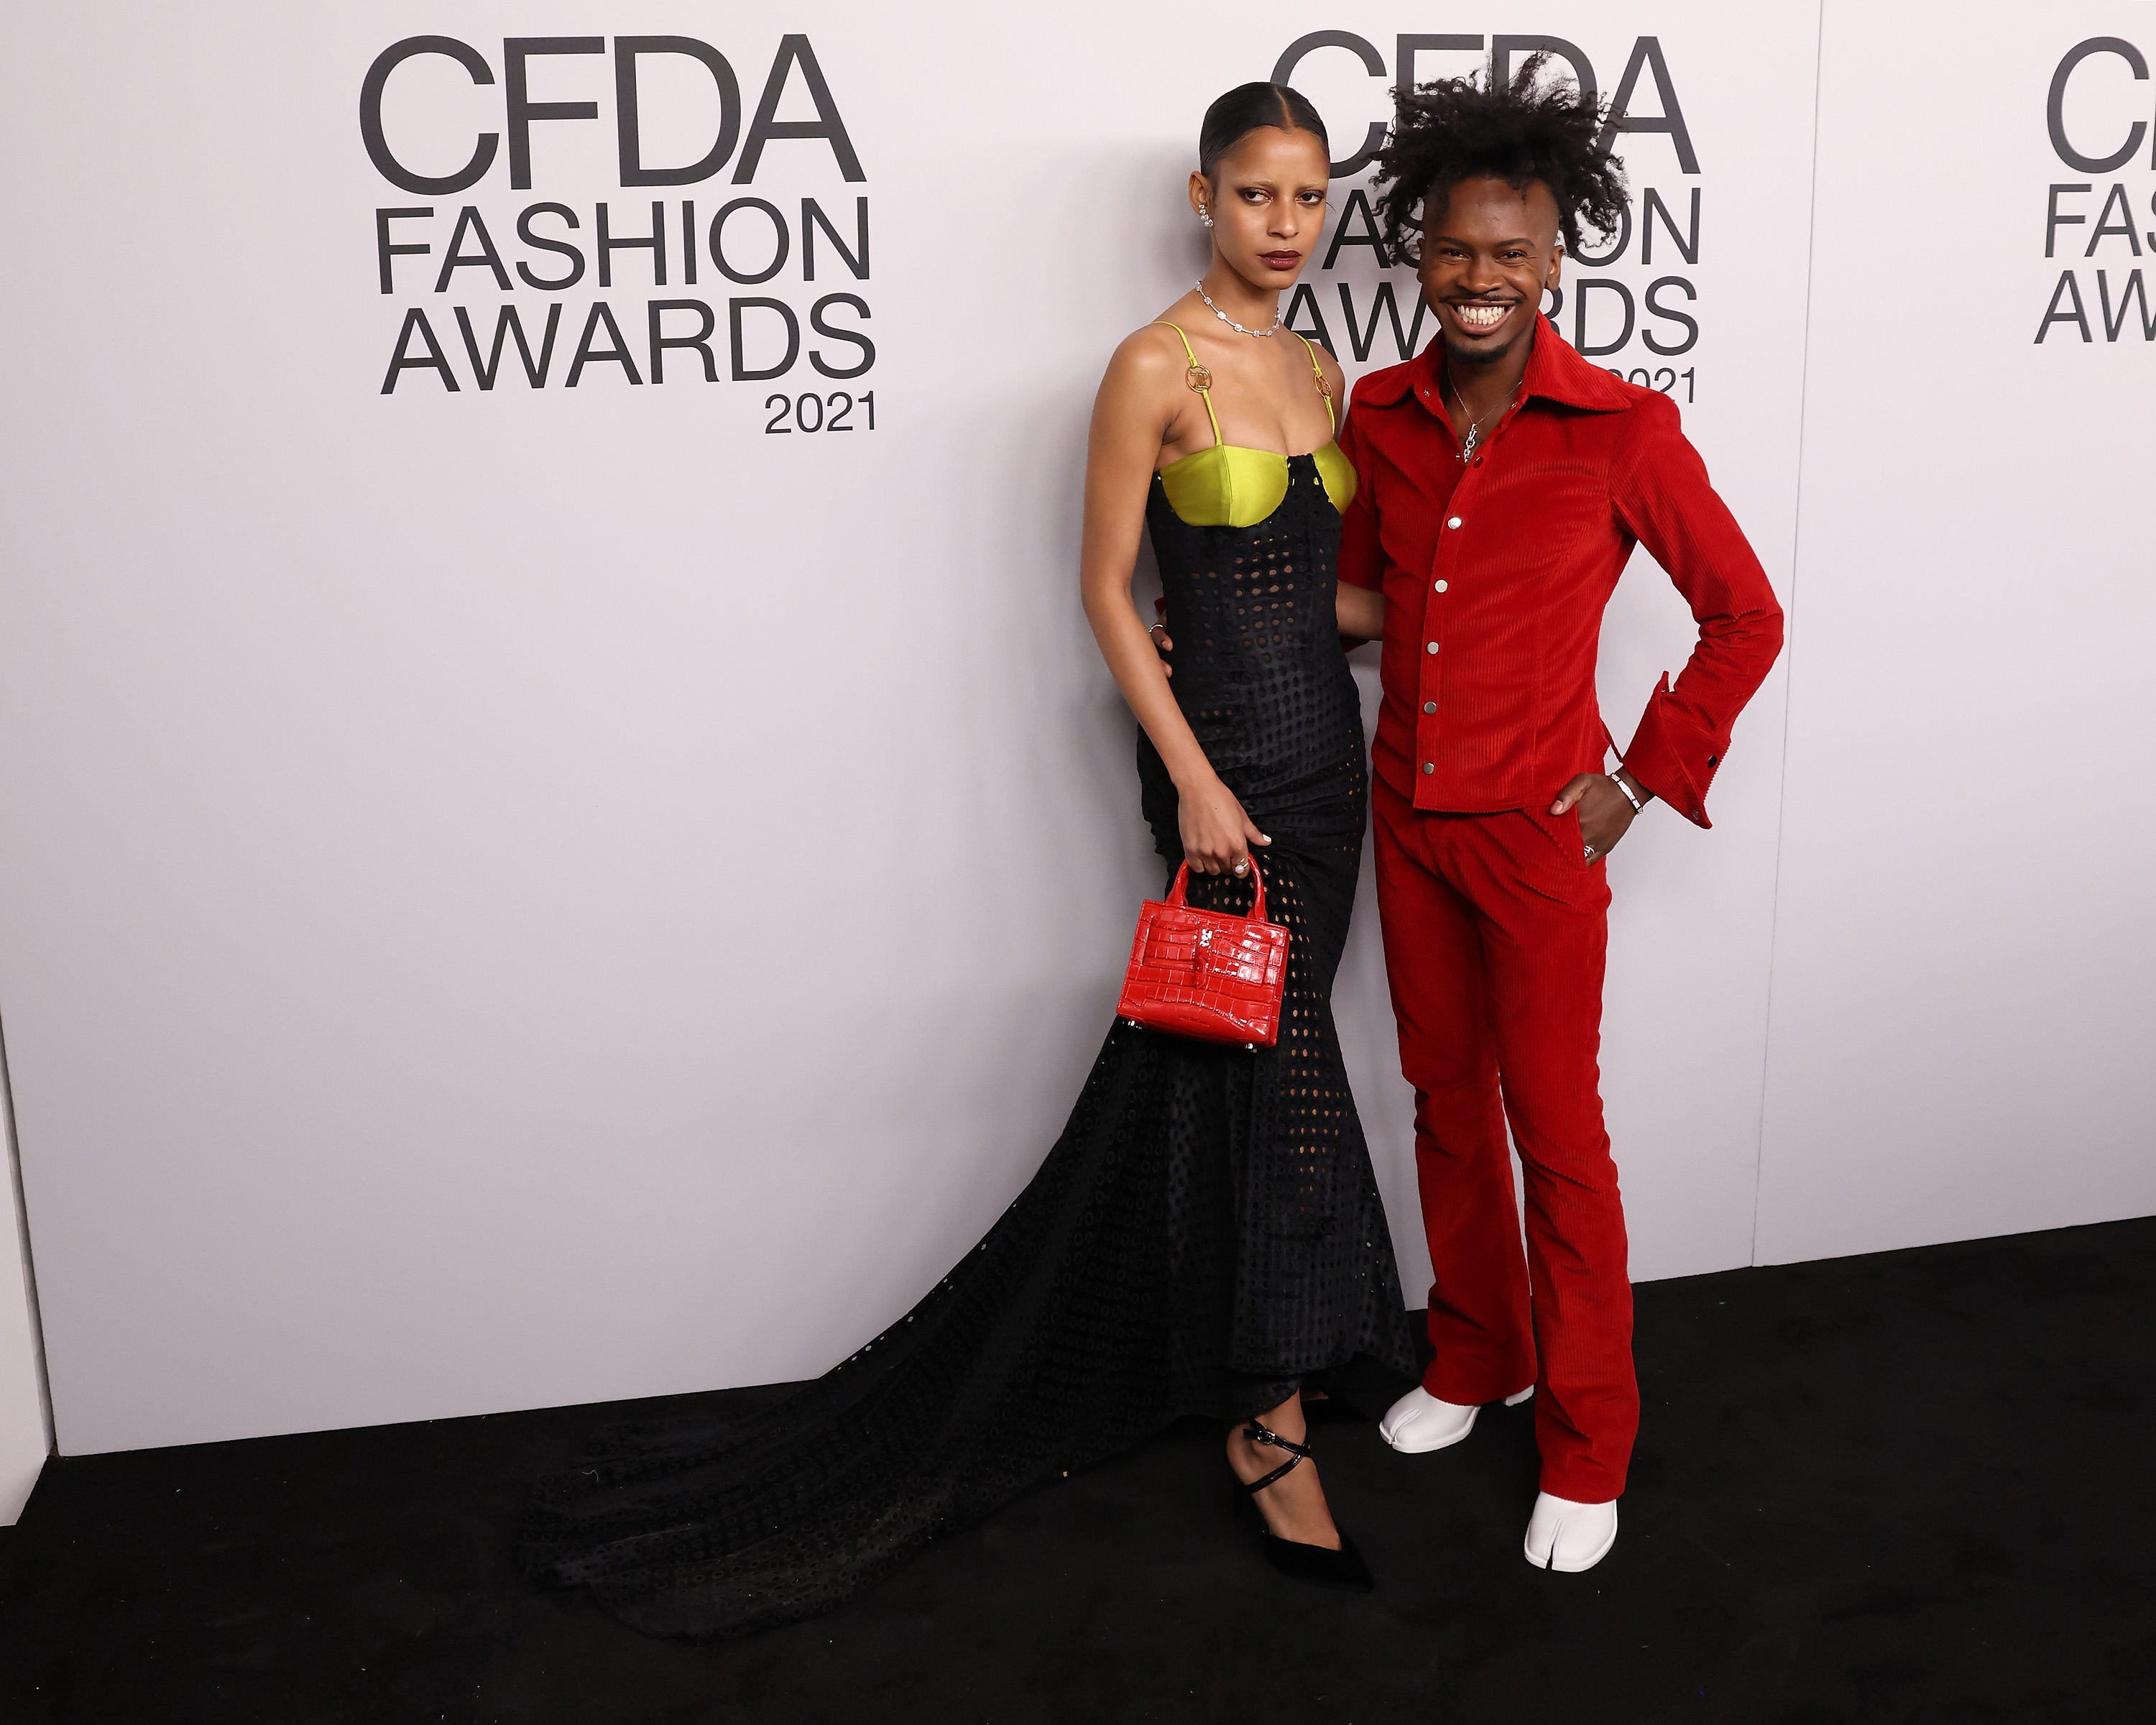 As the CFDA fashion awards is a celebration of American fashion, and the contributions of American brands to the global fashion landscape—this year's iteration, was an especially important night, as Black designers, and their contributions to the cannon, took centerstage. With Grace Wales Bonner, Christopher John Rogers, Telfar and Theophilio all taking home the big prizes, as well as Zendaya receiving the Fashion Icon Award, Aurora James the Founder's Award, and Dapper Dan the prestigious Geoffrey Bean Lifetime Achievement Award, the message was clear—that Black fashion designers have, are and continue to be integral to the fabric (no-pun intended) of this industry.